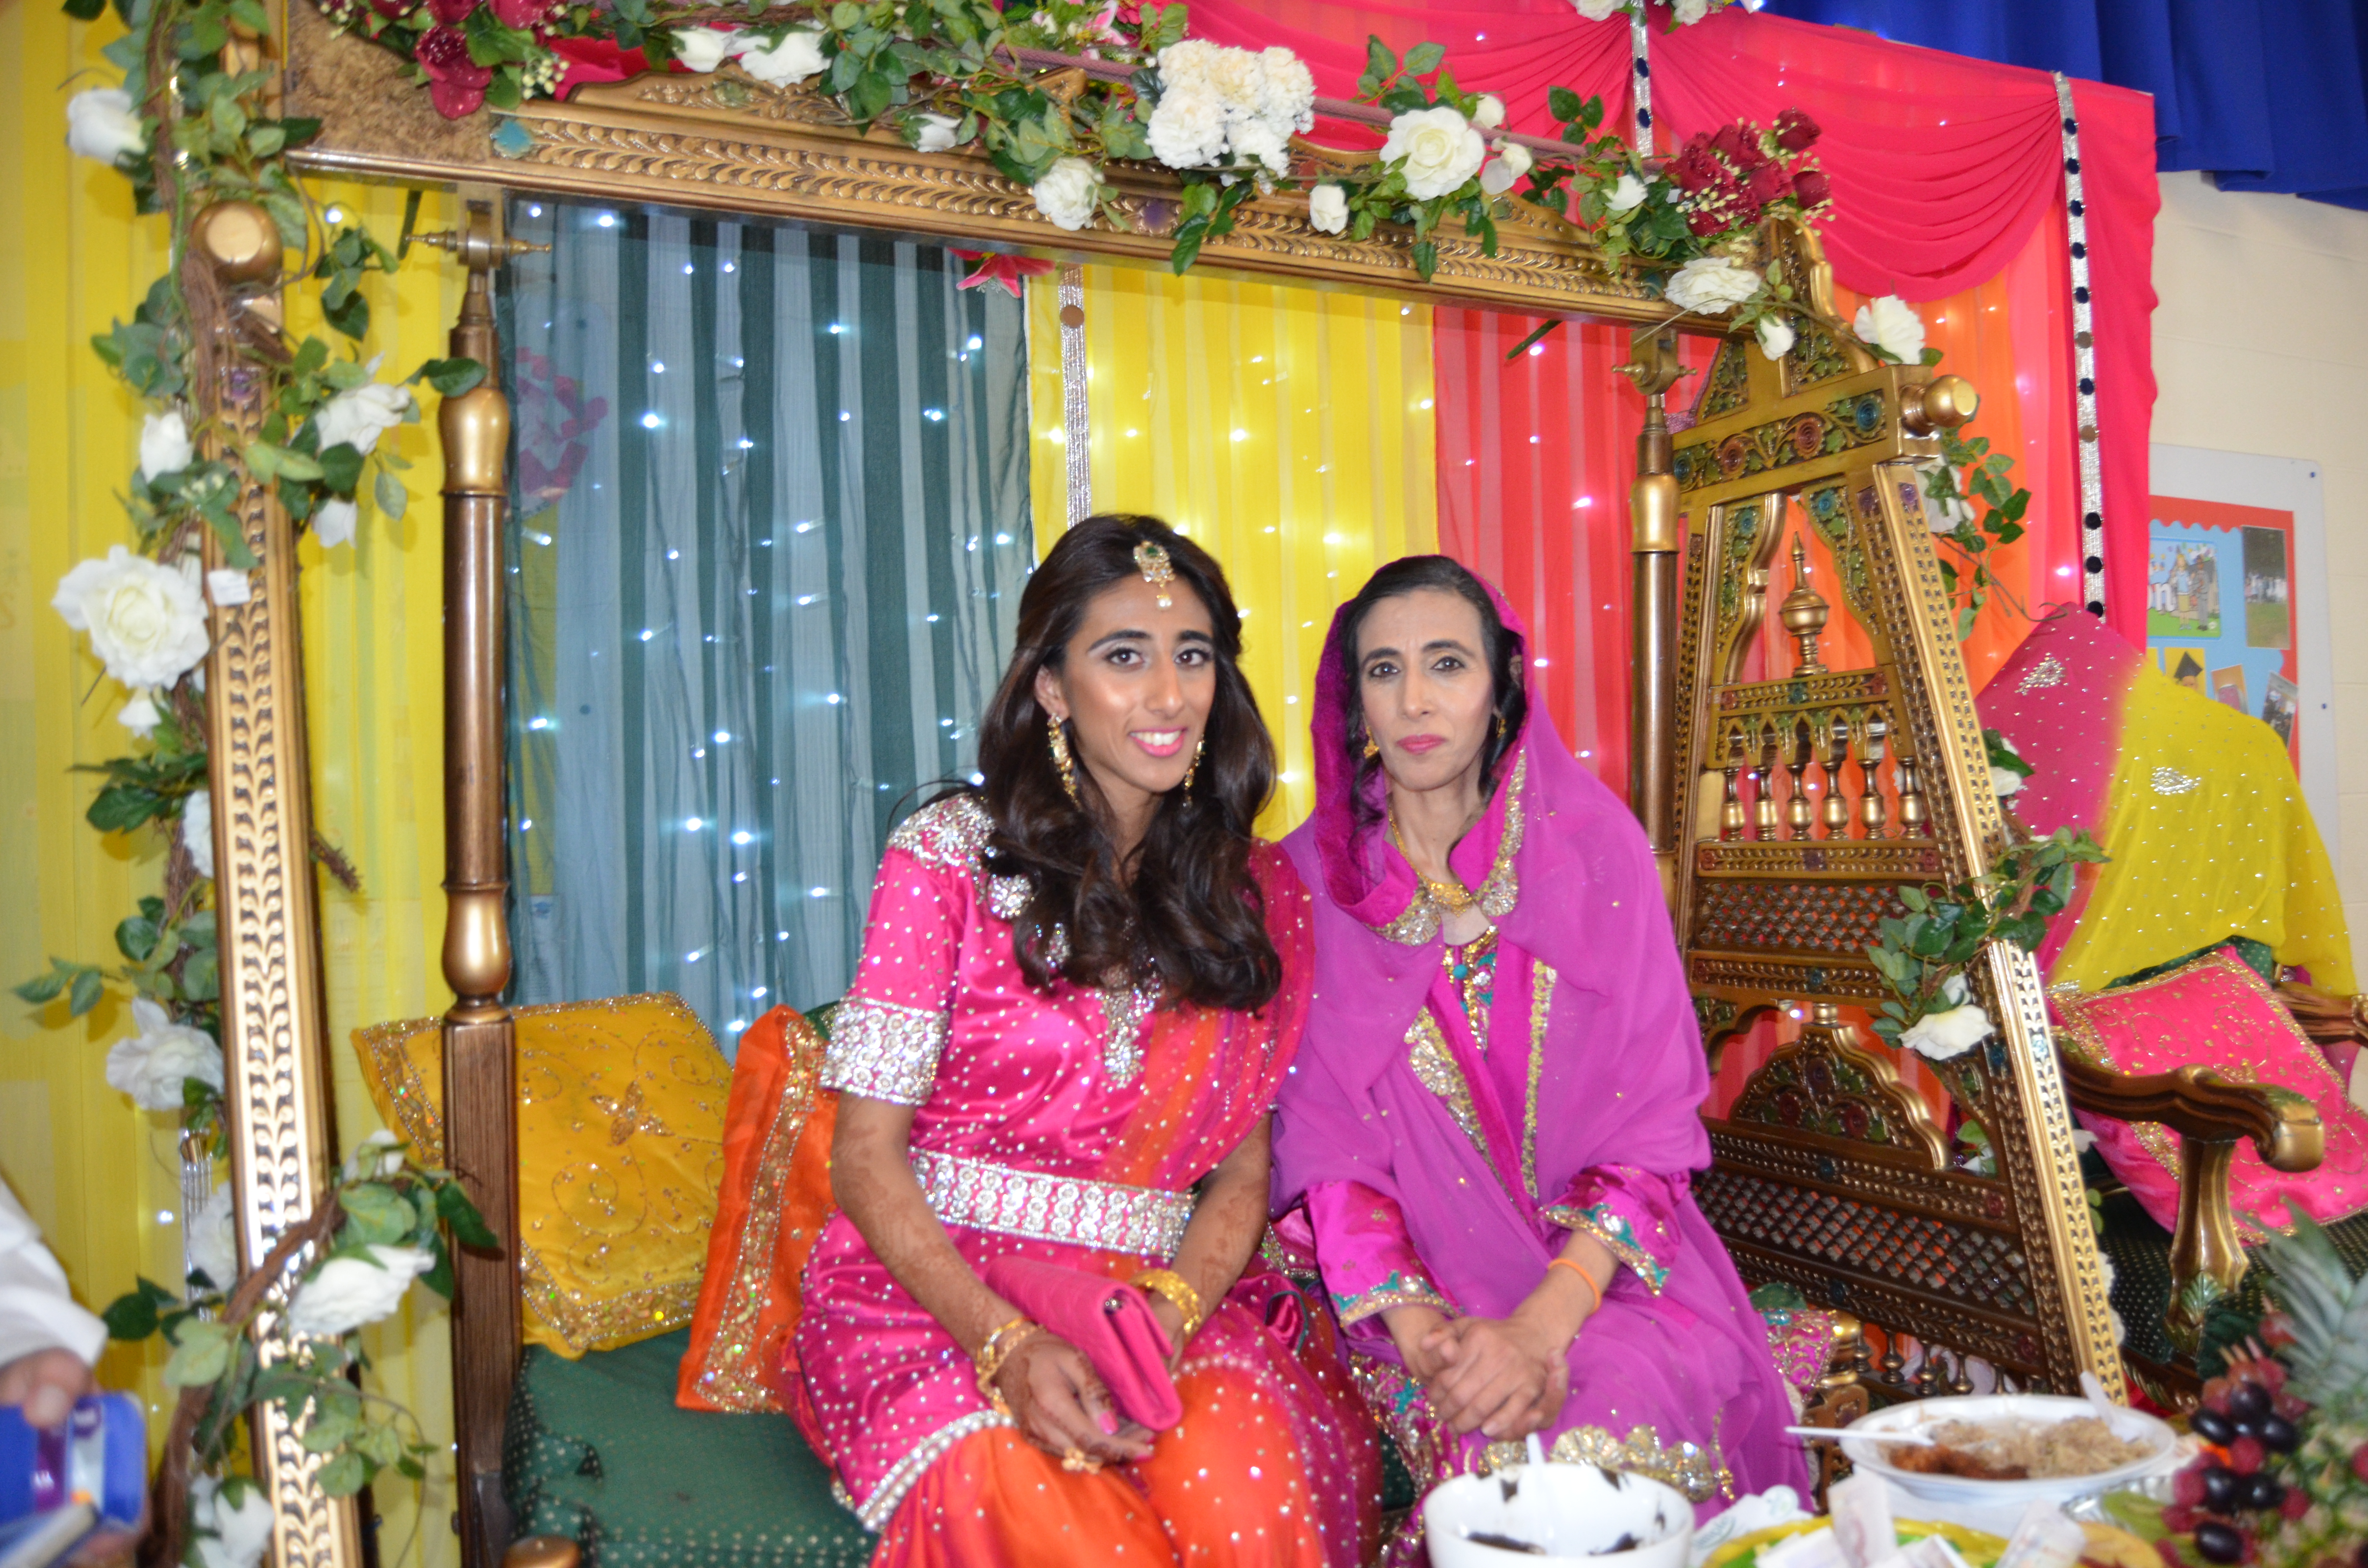 Me and Mom on stage @ My henna ceremony 